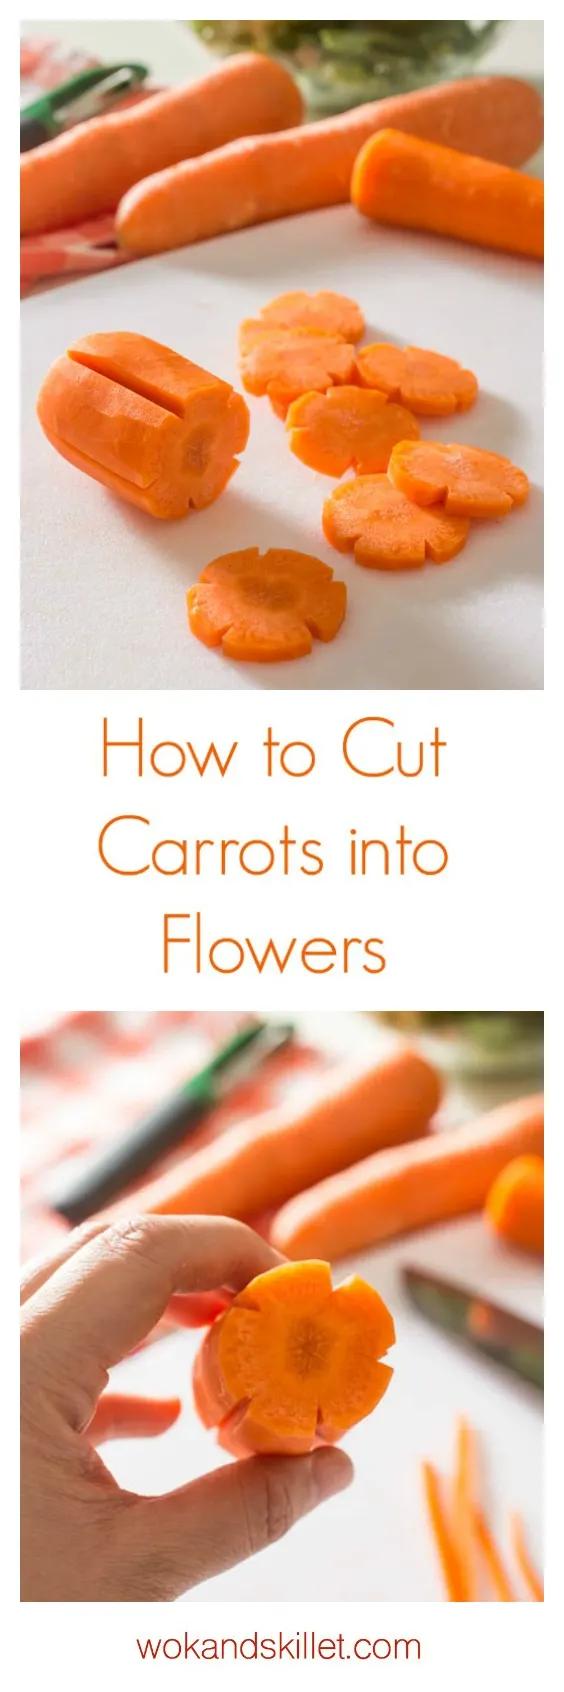 How to Cut Carrots into Flowers